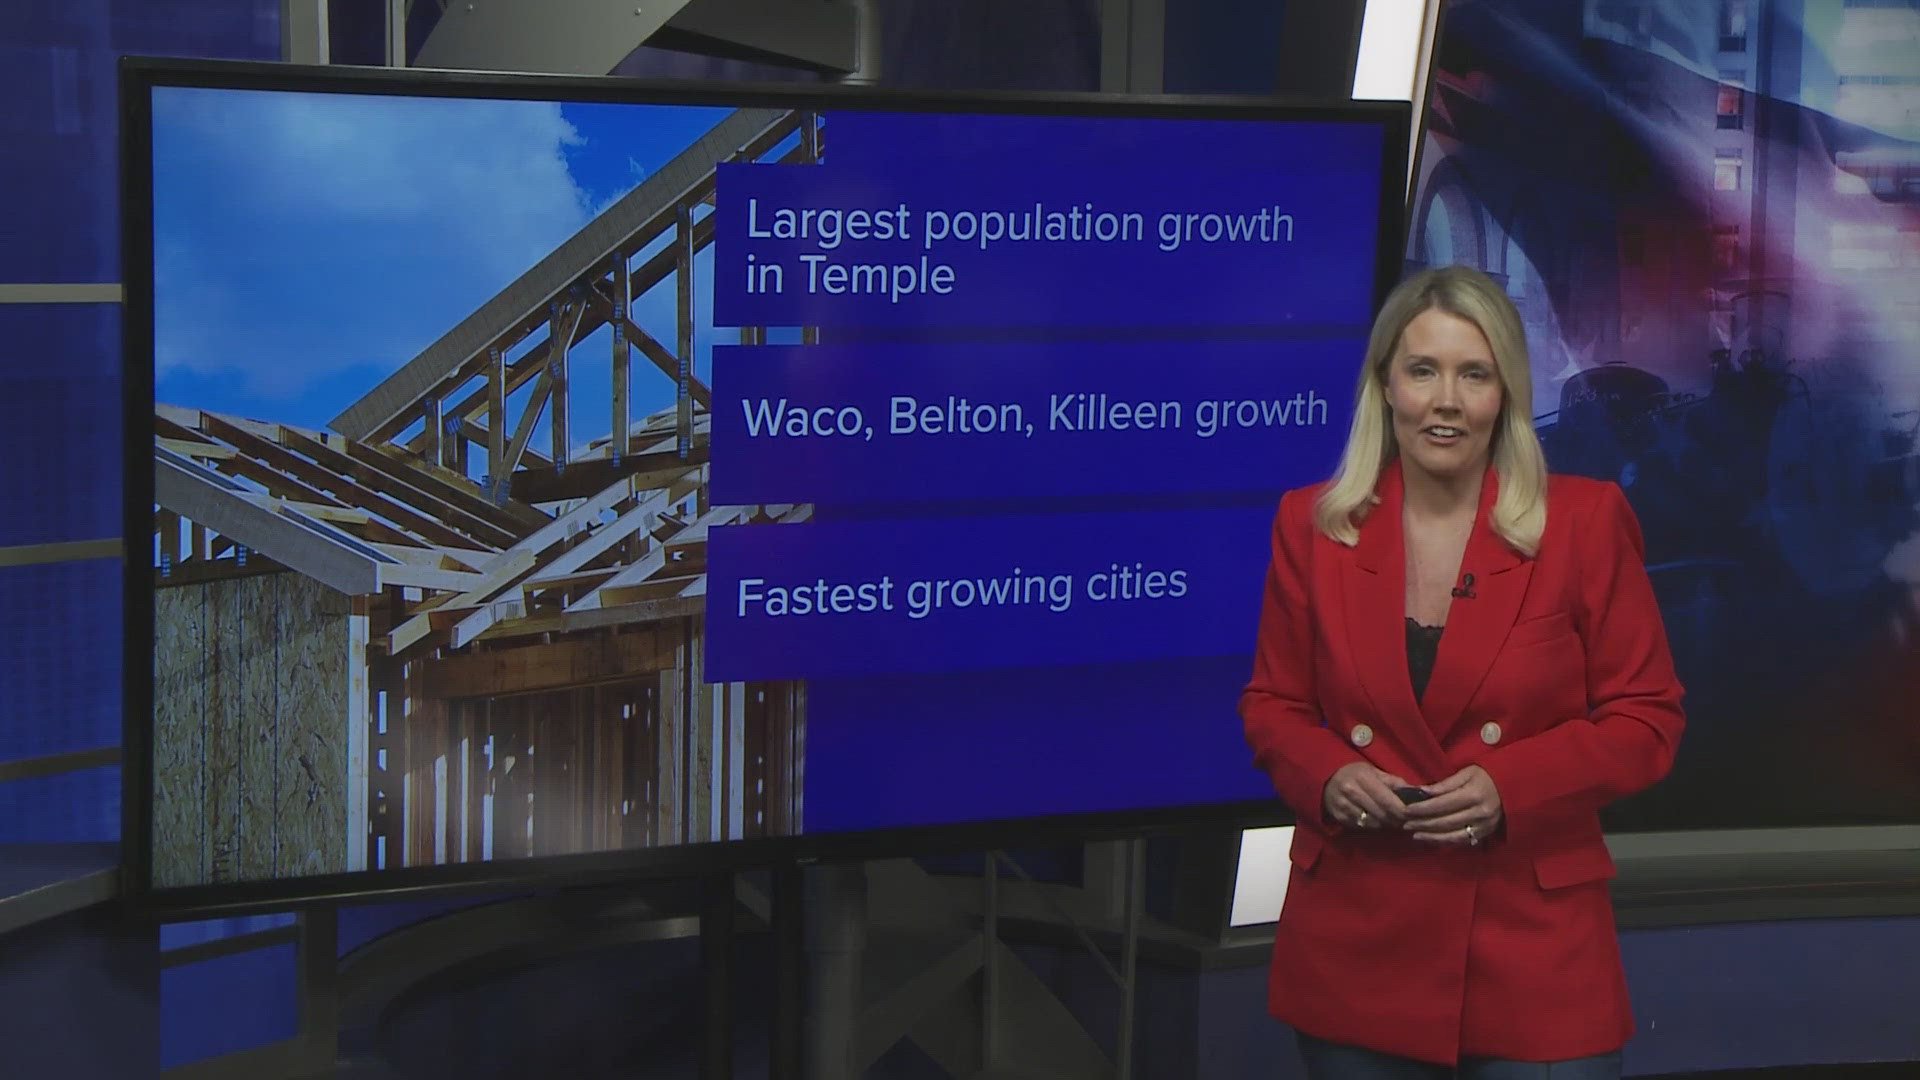 Many cities saw growth, including Killeen, Belton, Waco, and Temple.